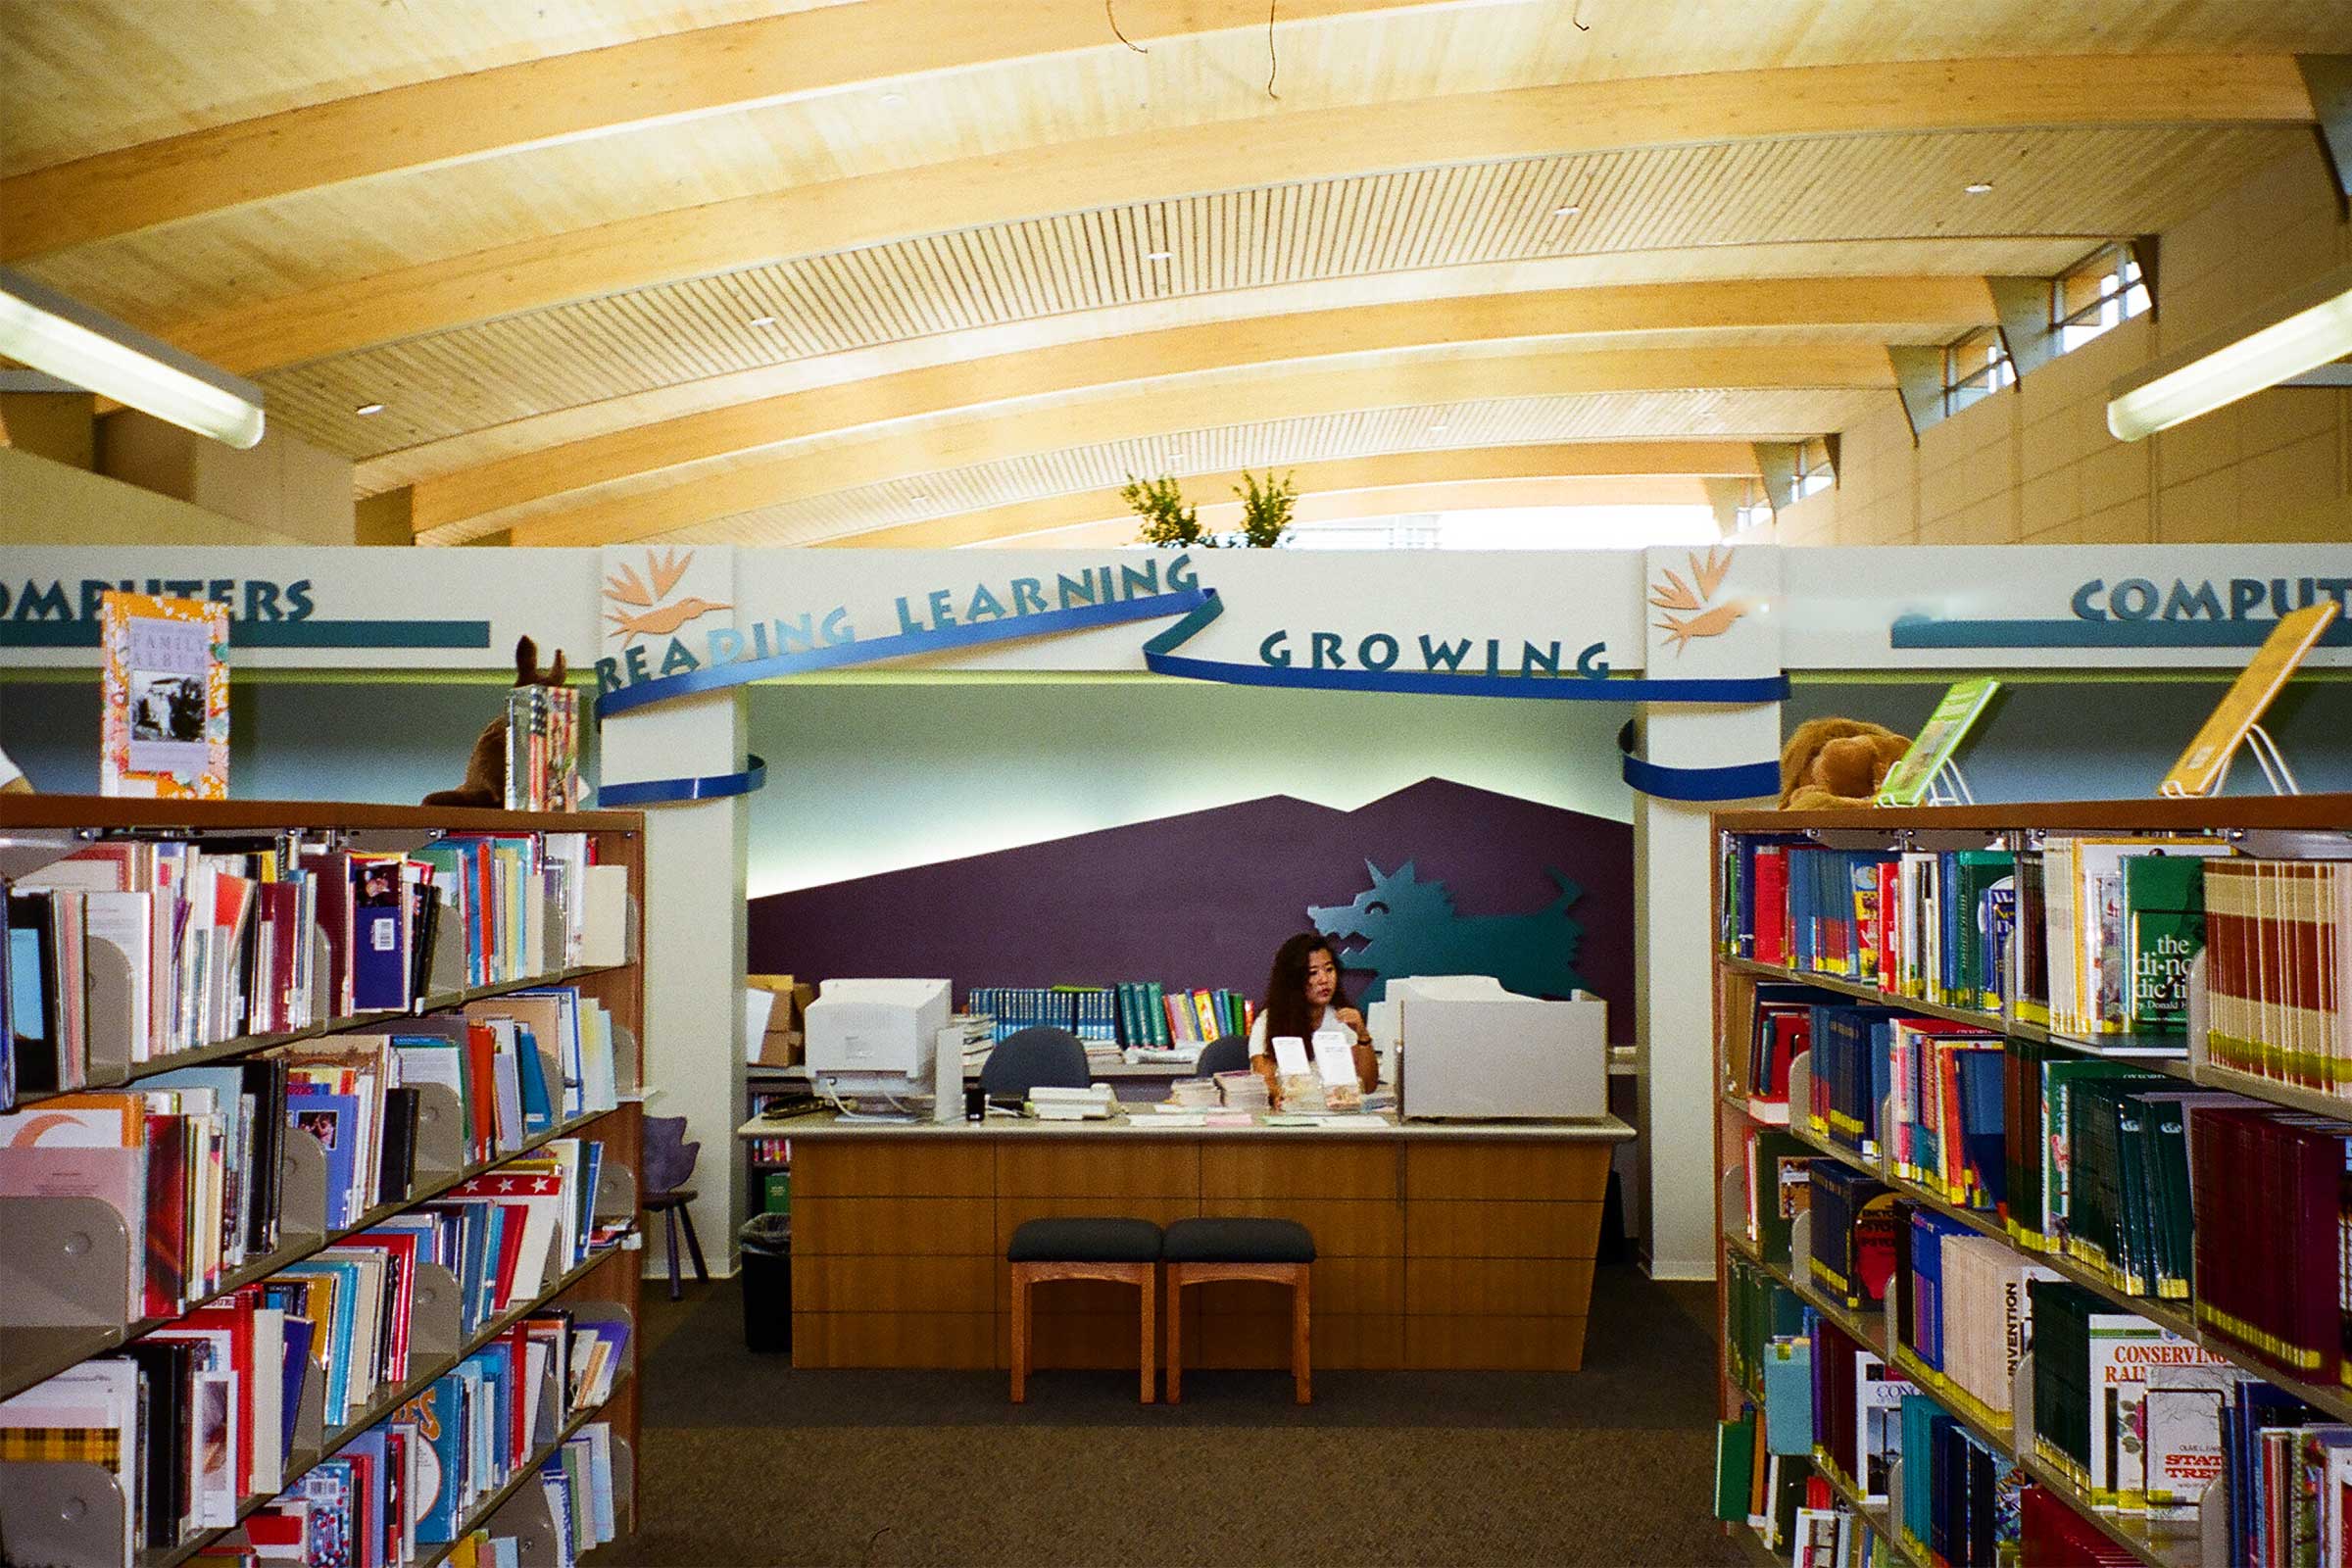 mission viejo library